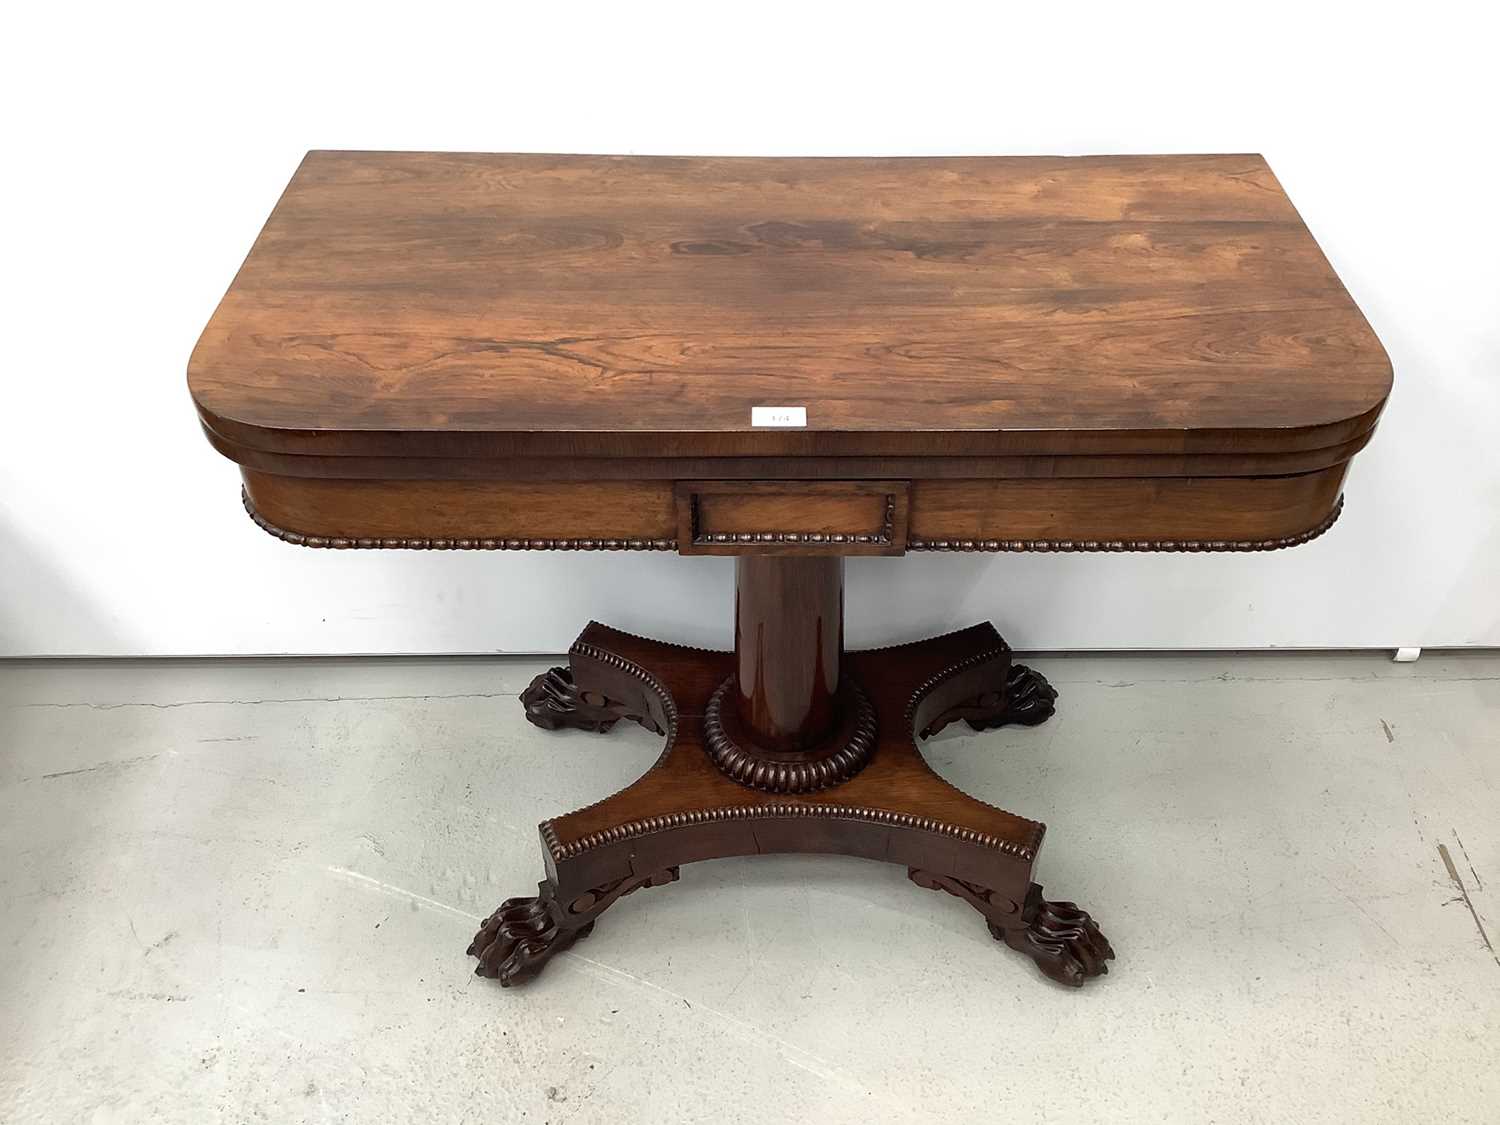 Lot 174 - 19th century rosewood card table with foldover revolving top on turned column and quatrefoil base with carved paw feet, 90.5cm wide x 14.5cm high